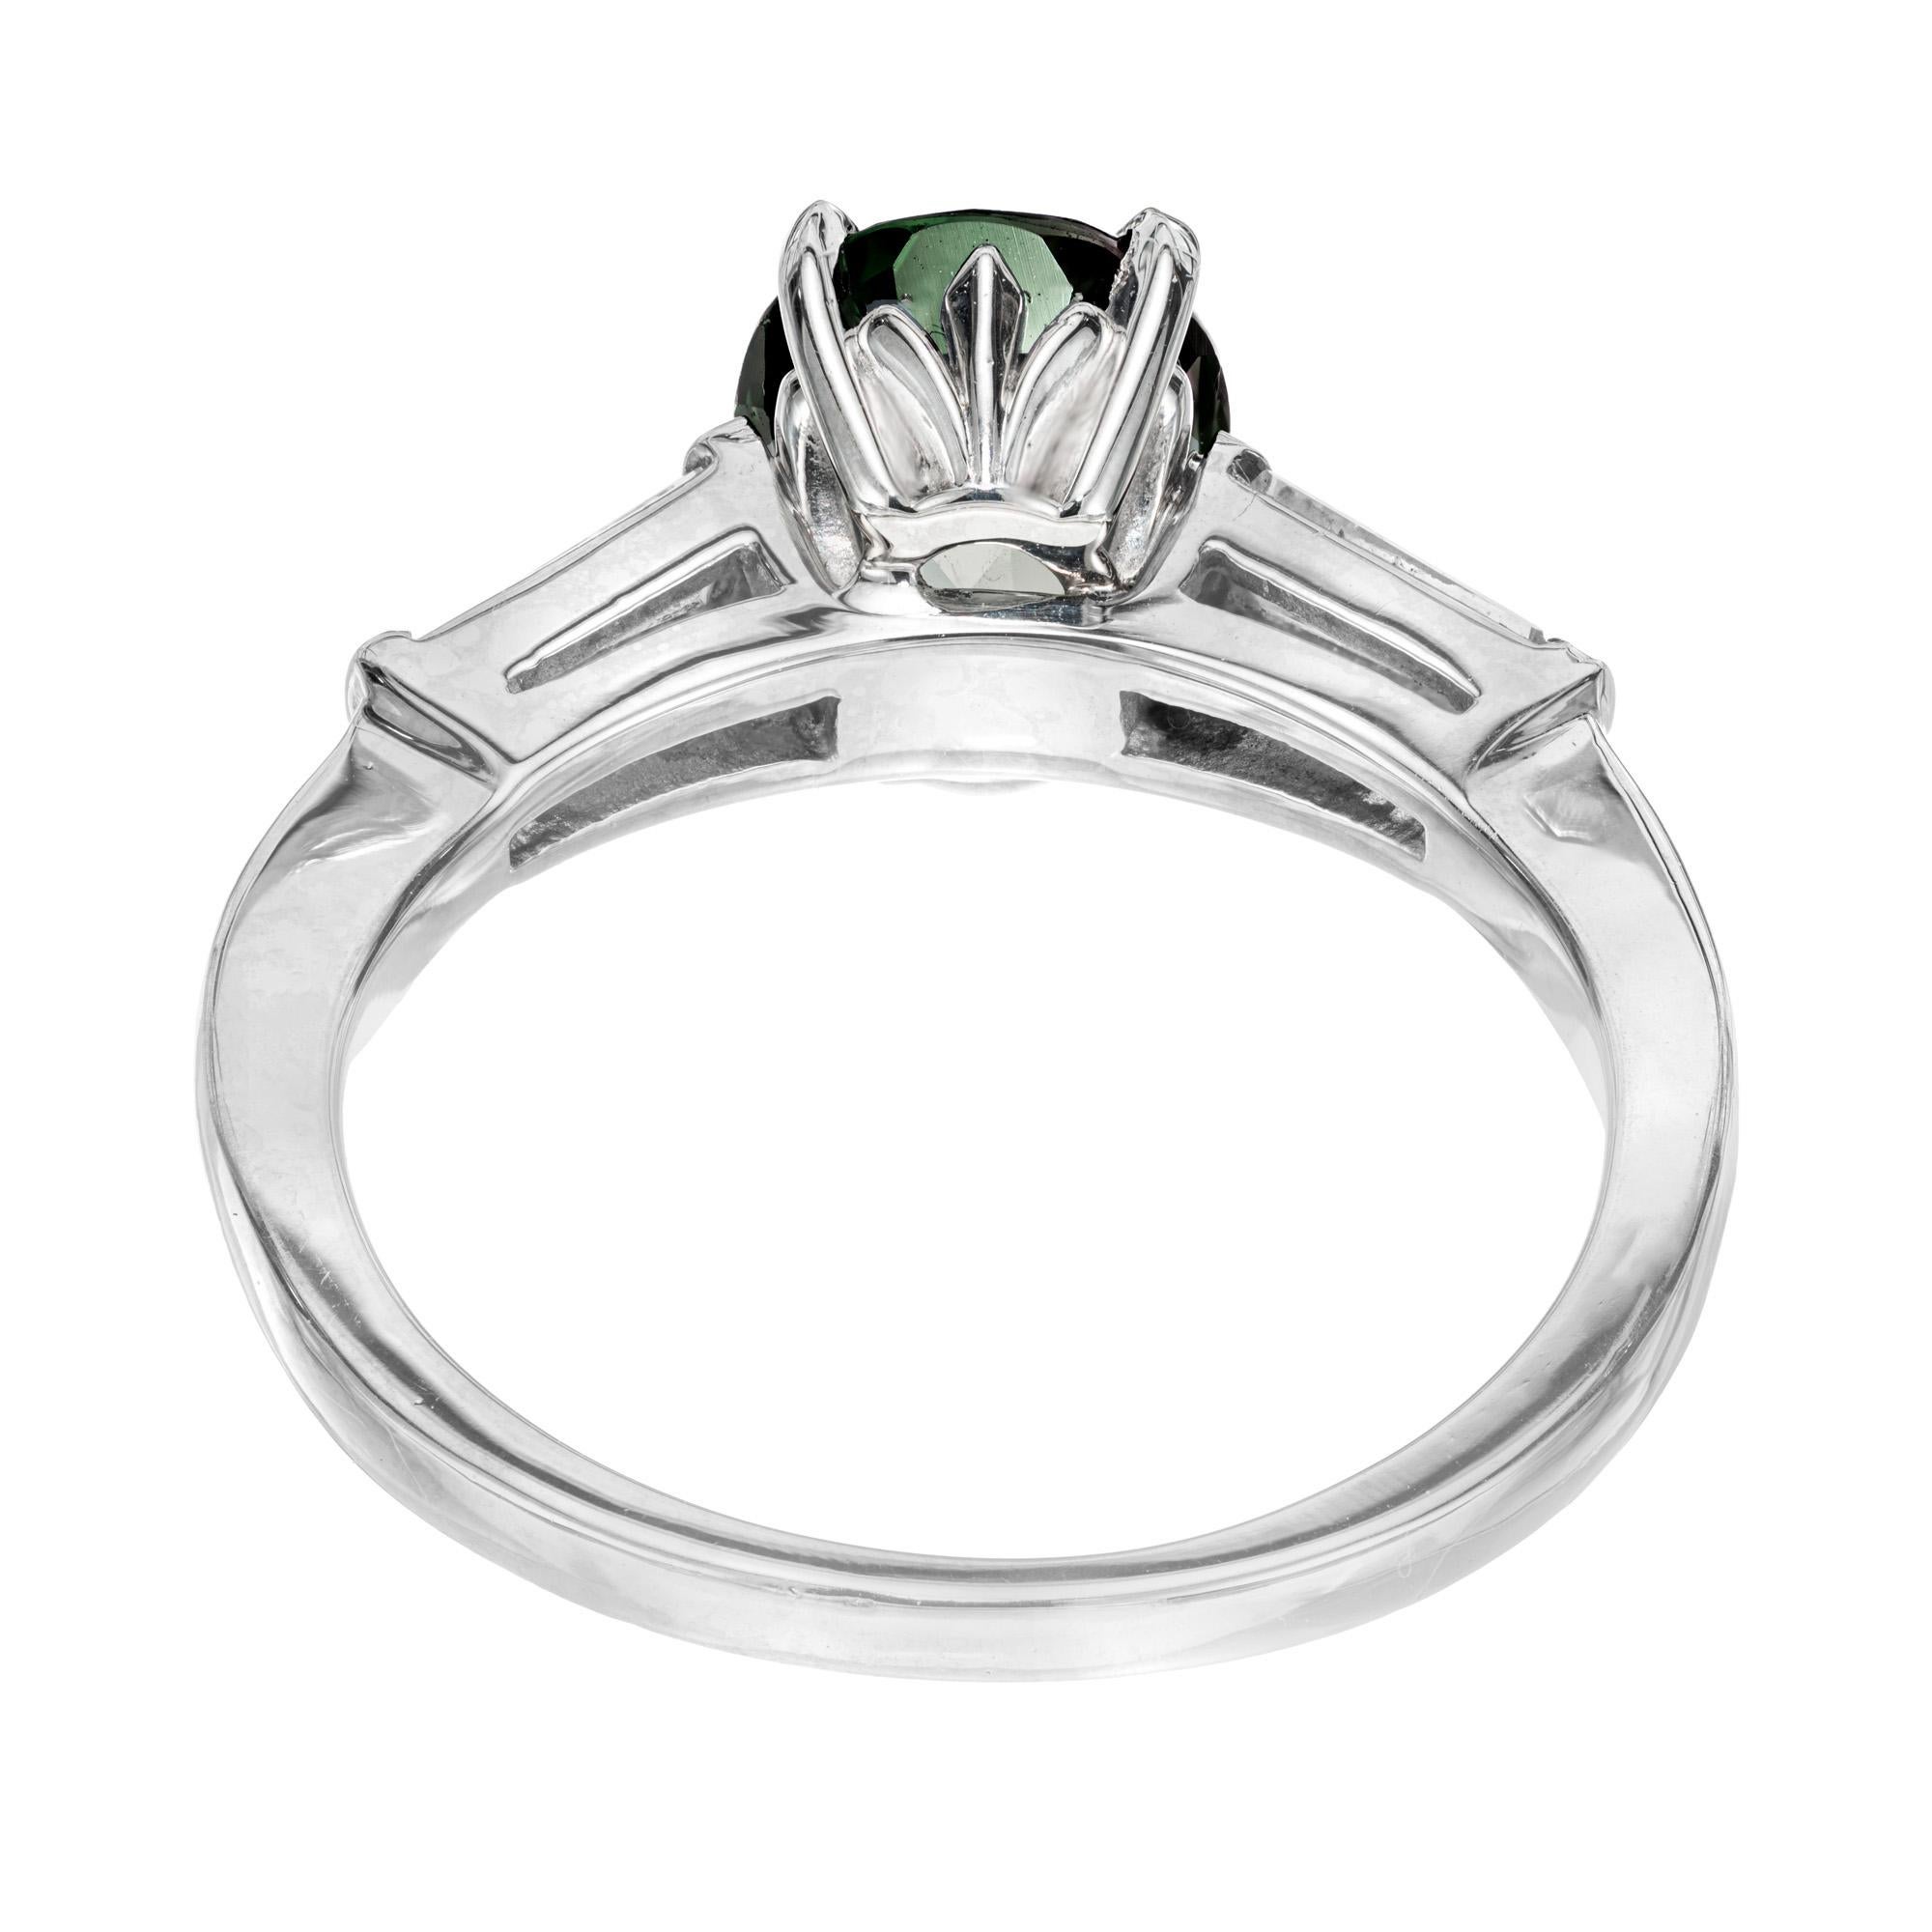 Peter Suchy GIA Certified 2.59 Carat Green Sapphire Diamond Platinum Ring For Sale 1